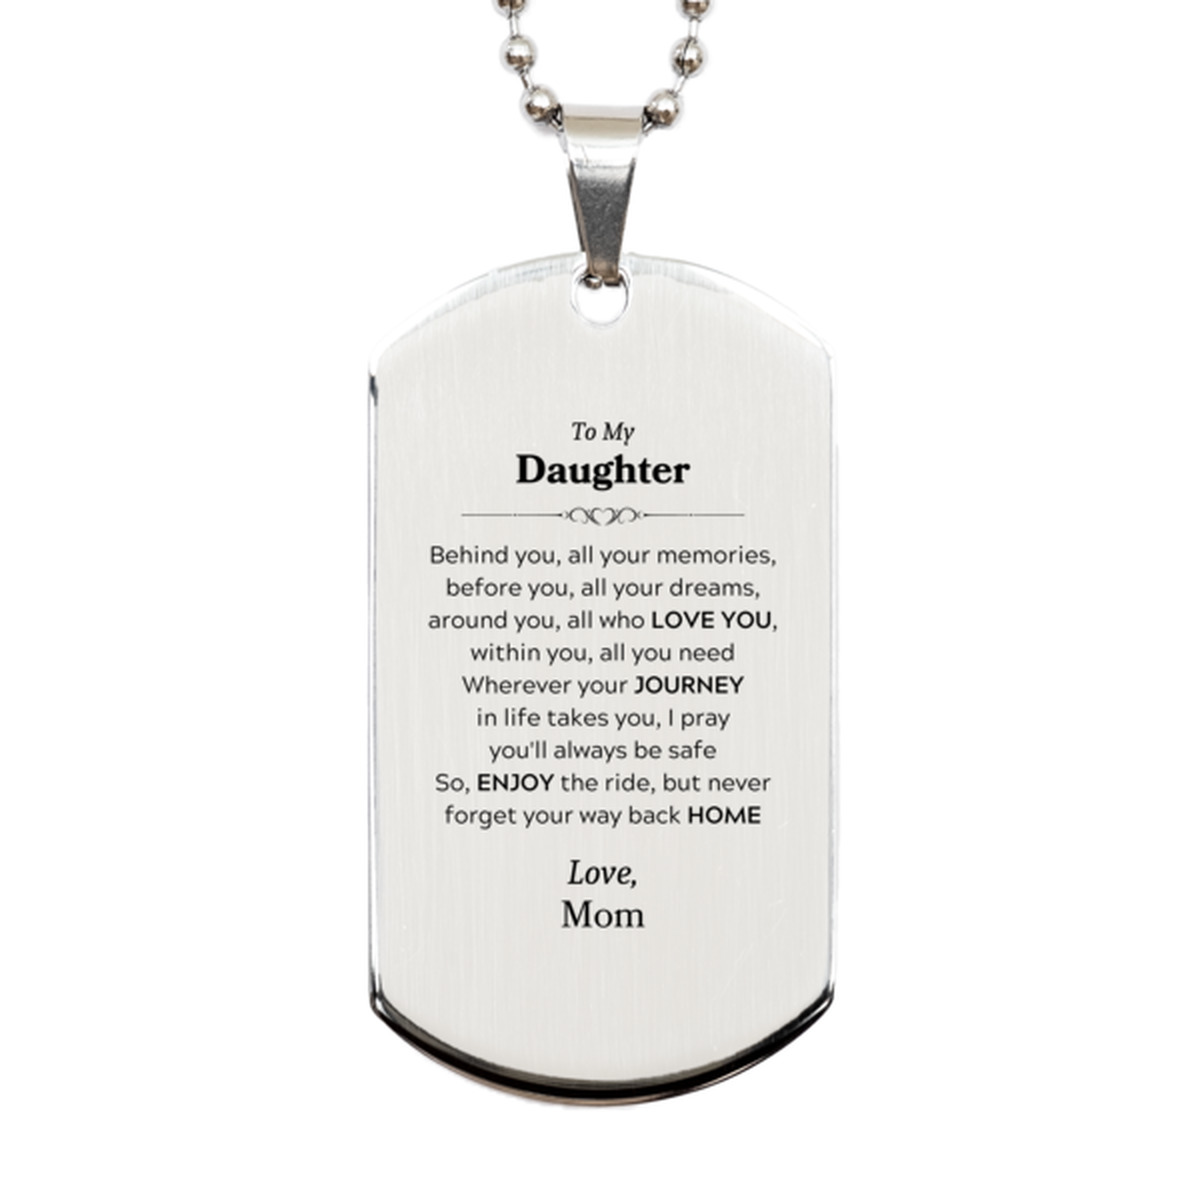 To My Daughter Graduation Gifts from Mom, Daughter Silver Dog Tag Christmas Birthday Gifts for Daughter Behind you, all your memories, before you, all your dreams. Love, Mom